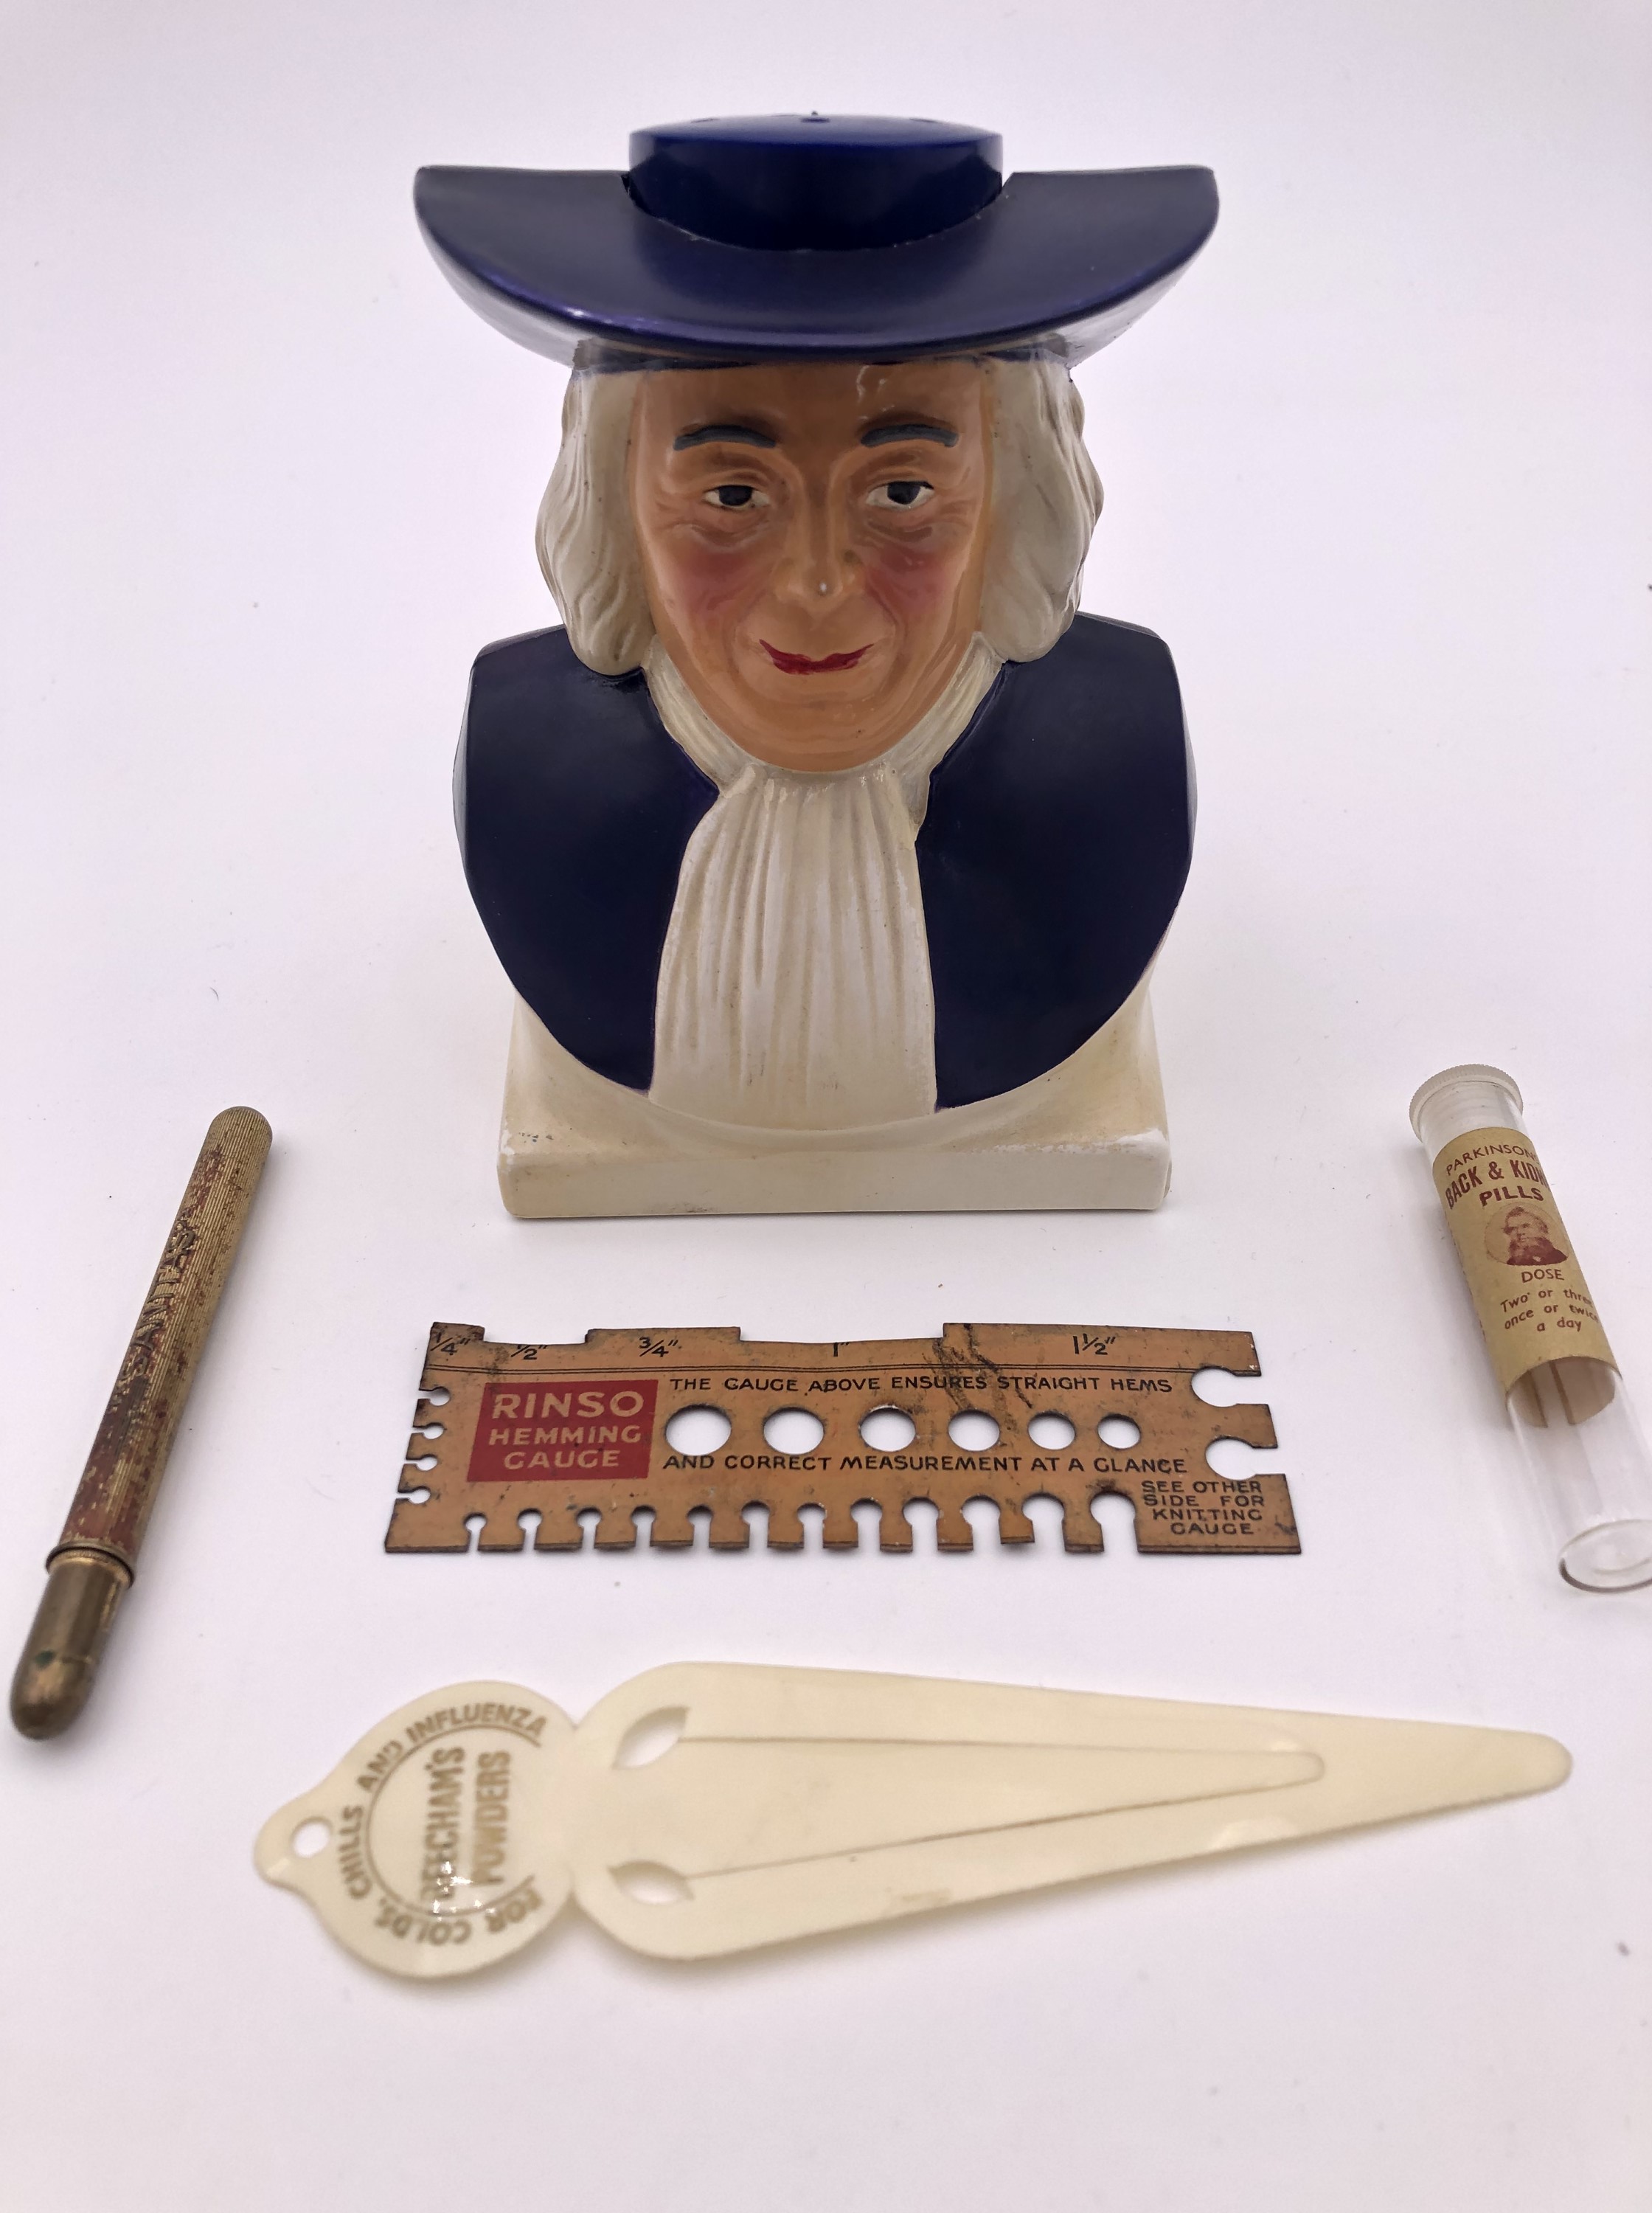 Sundry advertising and other collectables including a Quaker porridge caster, a Beecham's Powders